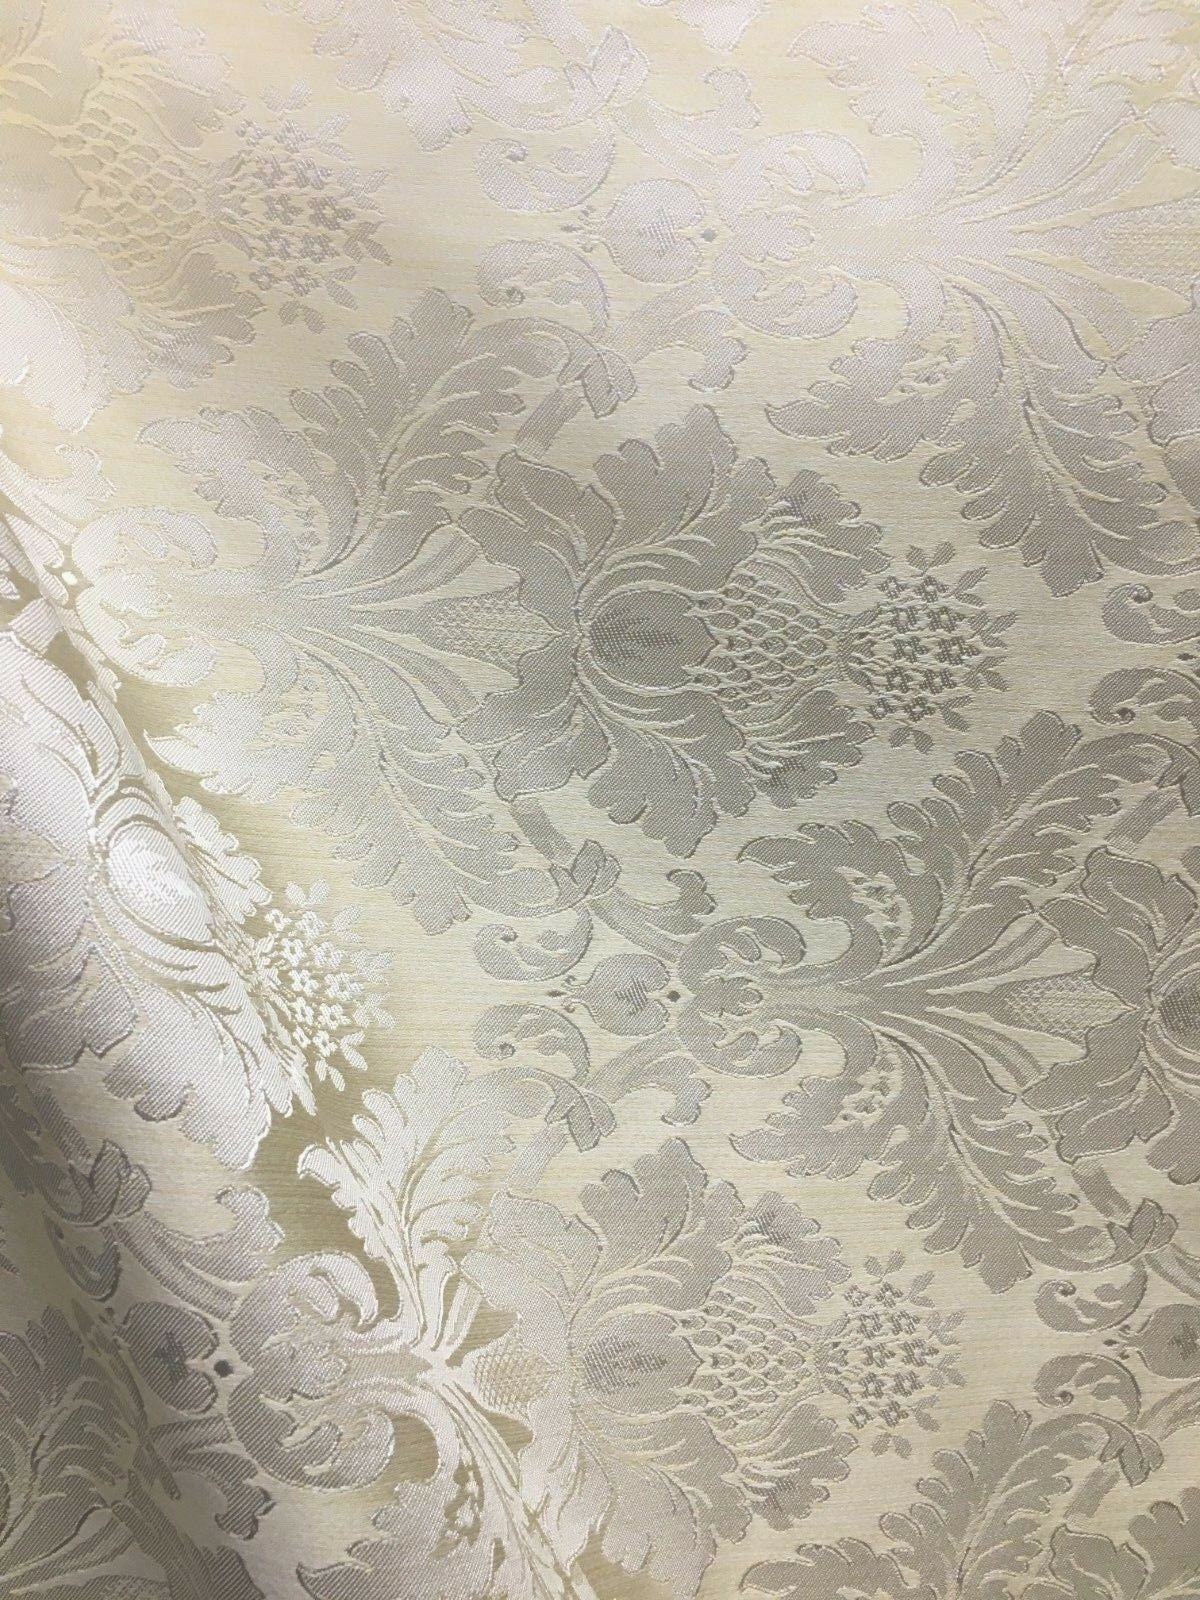 IVORY Damask Jacquard Brocade Flower Floral Fabric (110 in.) Sold By The Yard